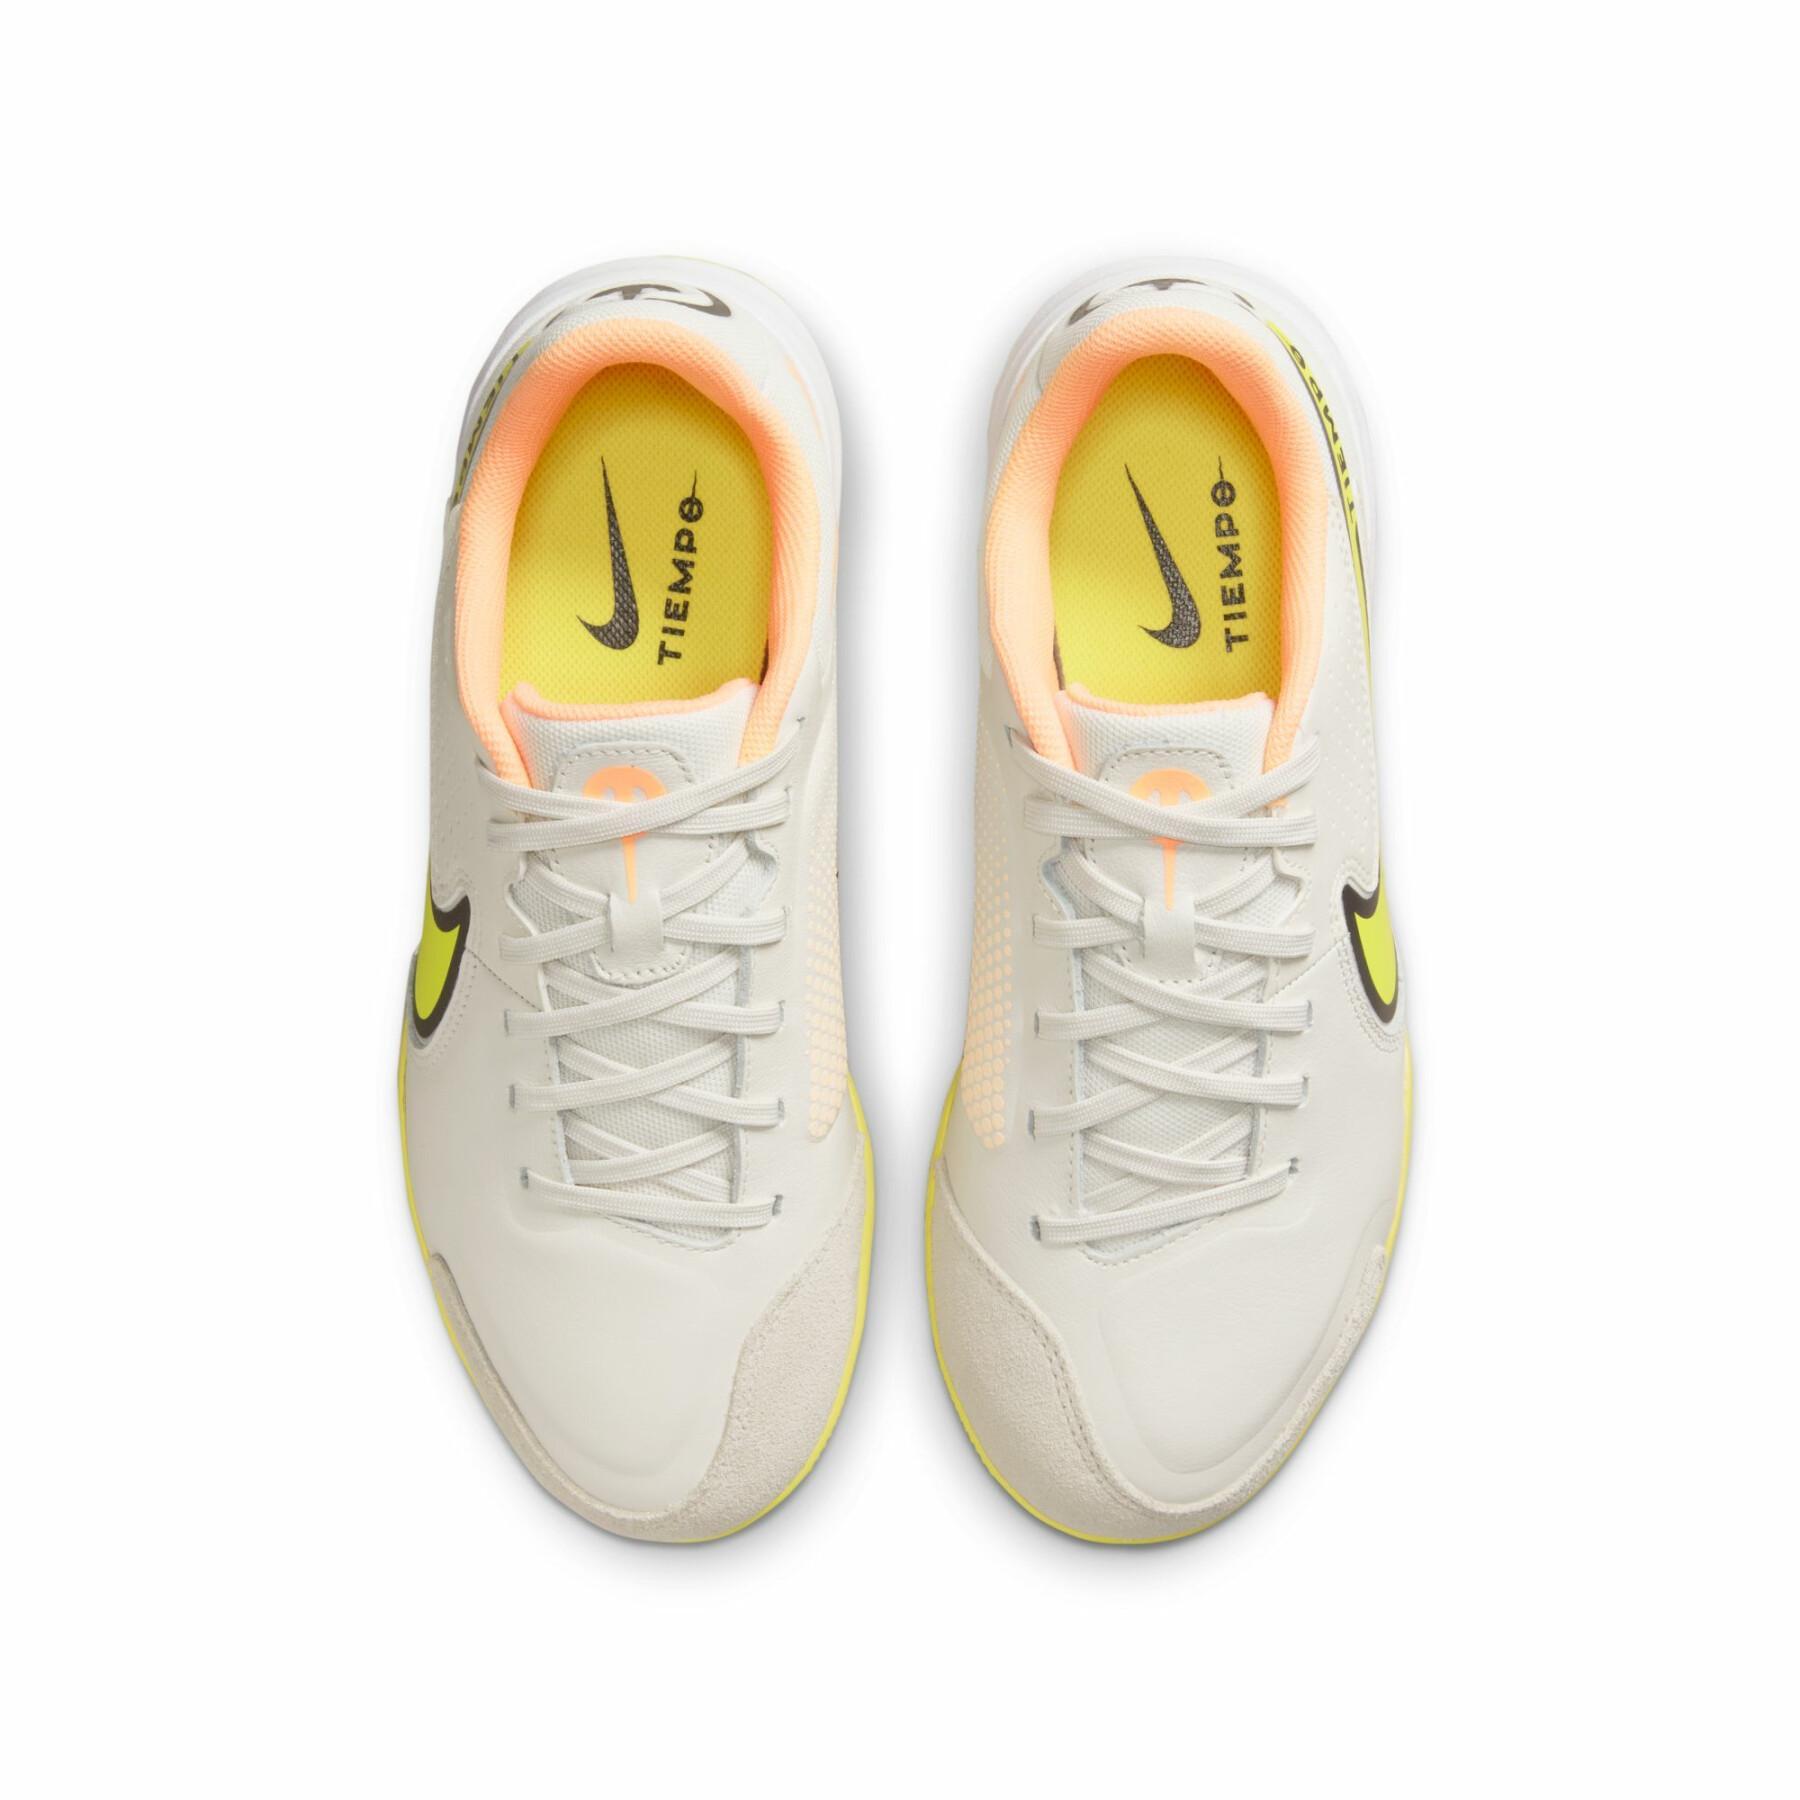 Chaussures de football enfant Nike Tiempo Legend 9 Academy IC - Lucent Pack